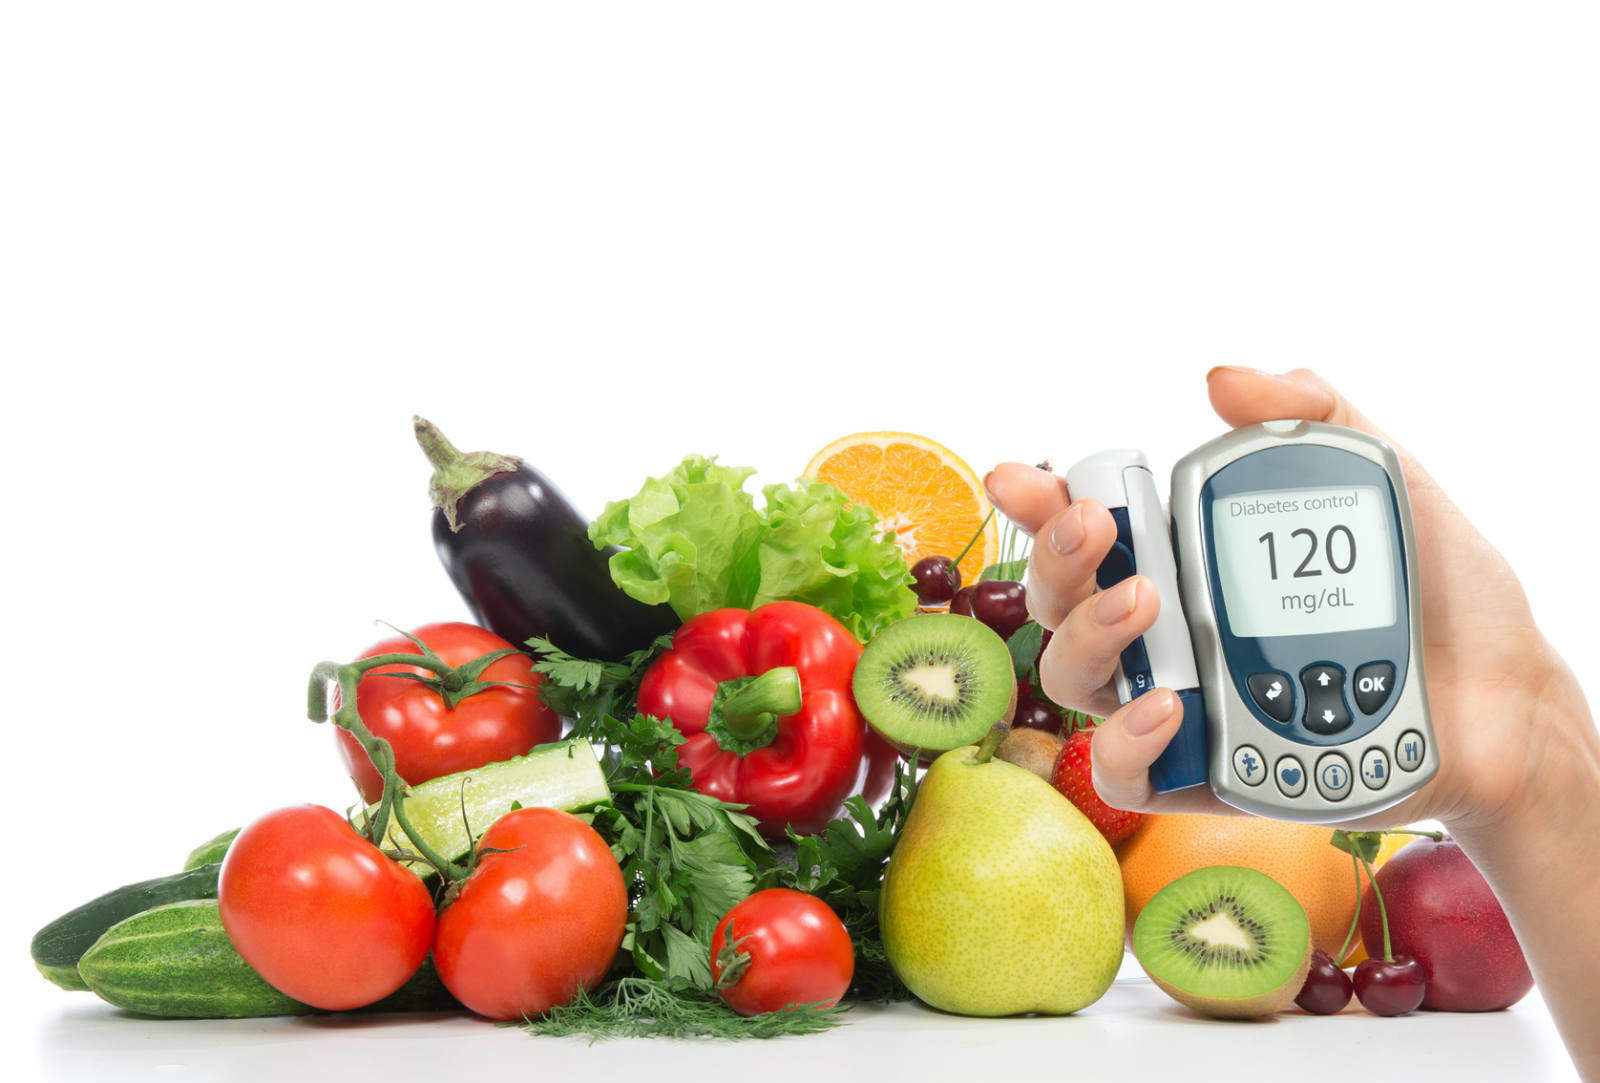 10 Diabetes Diet Tips from Physician Assistants